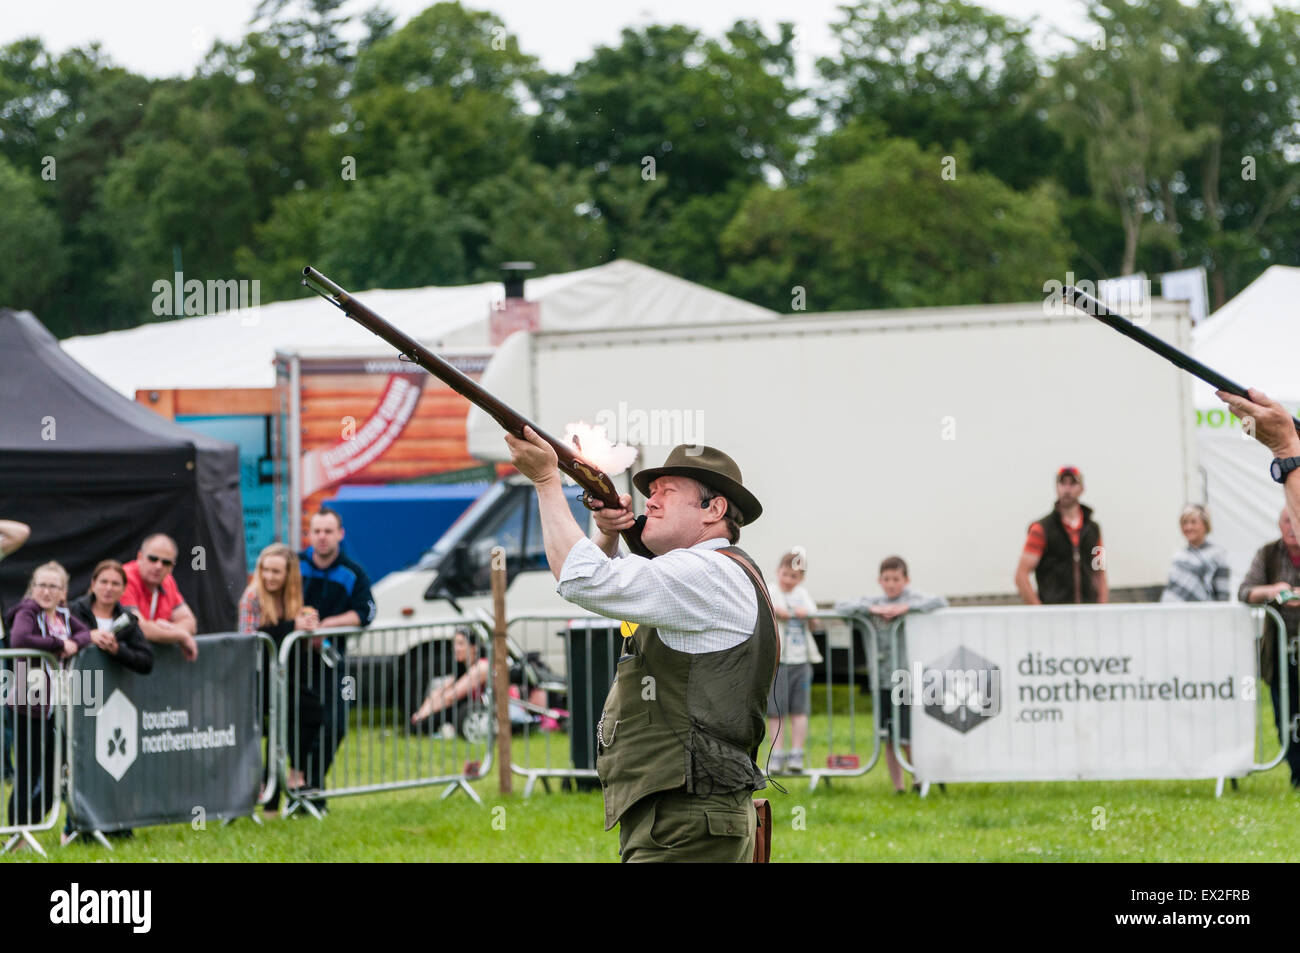 A man shoots an old fashioned flintlock musket Stock Photo